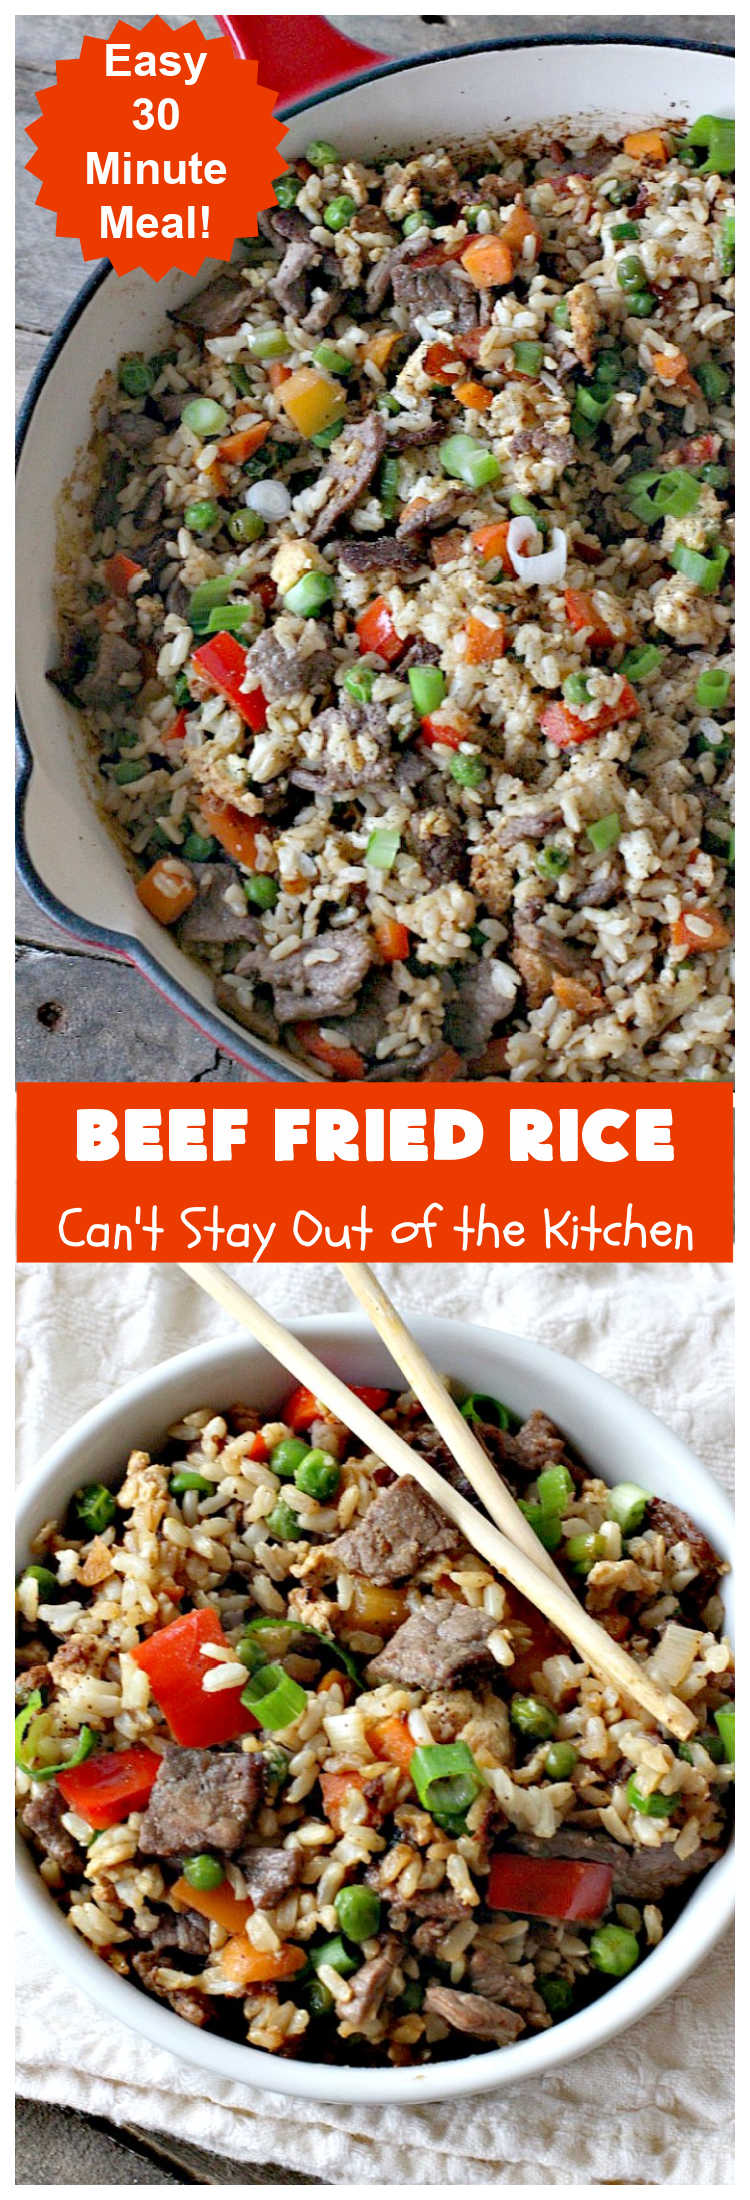 Beef Fried Rice | Can't Stay Out of the Kitchen | easy 30-minute meal! fabulous #FriedRice with #beef & lots of #veggies. Perfect for #FreezerMeals. #BeefFriedRice